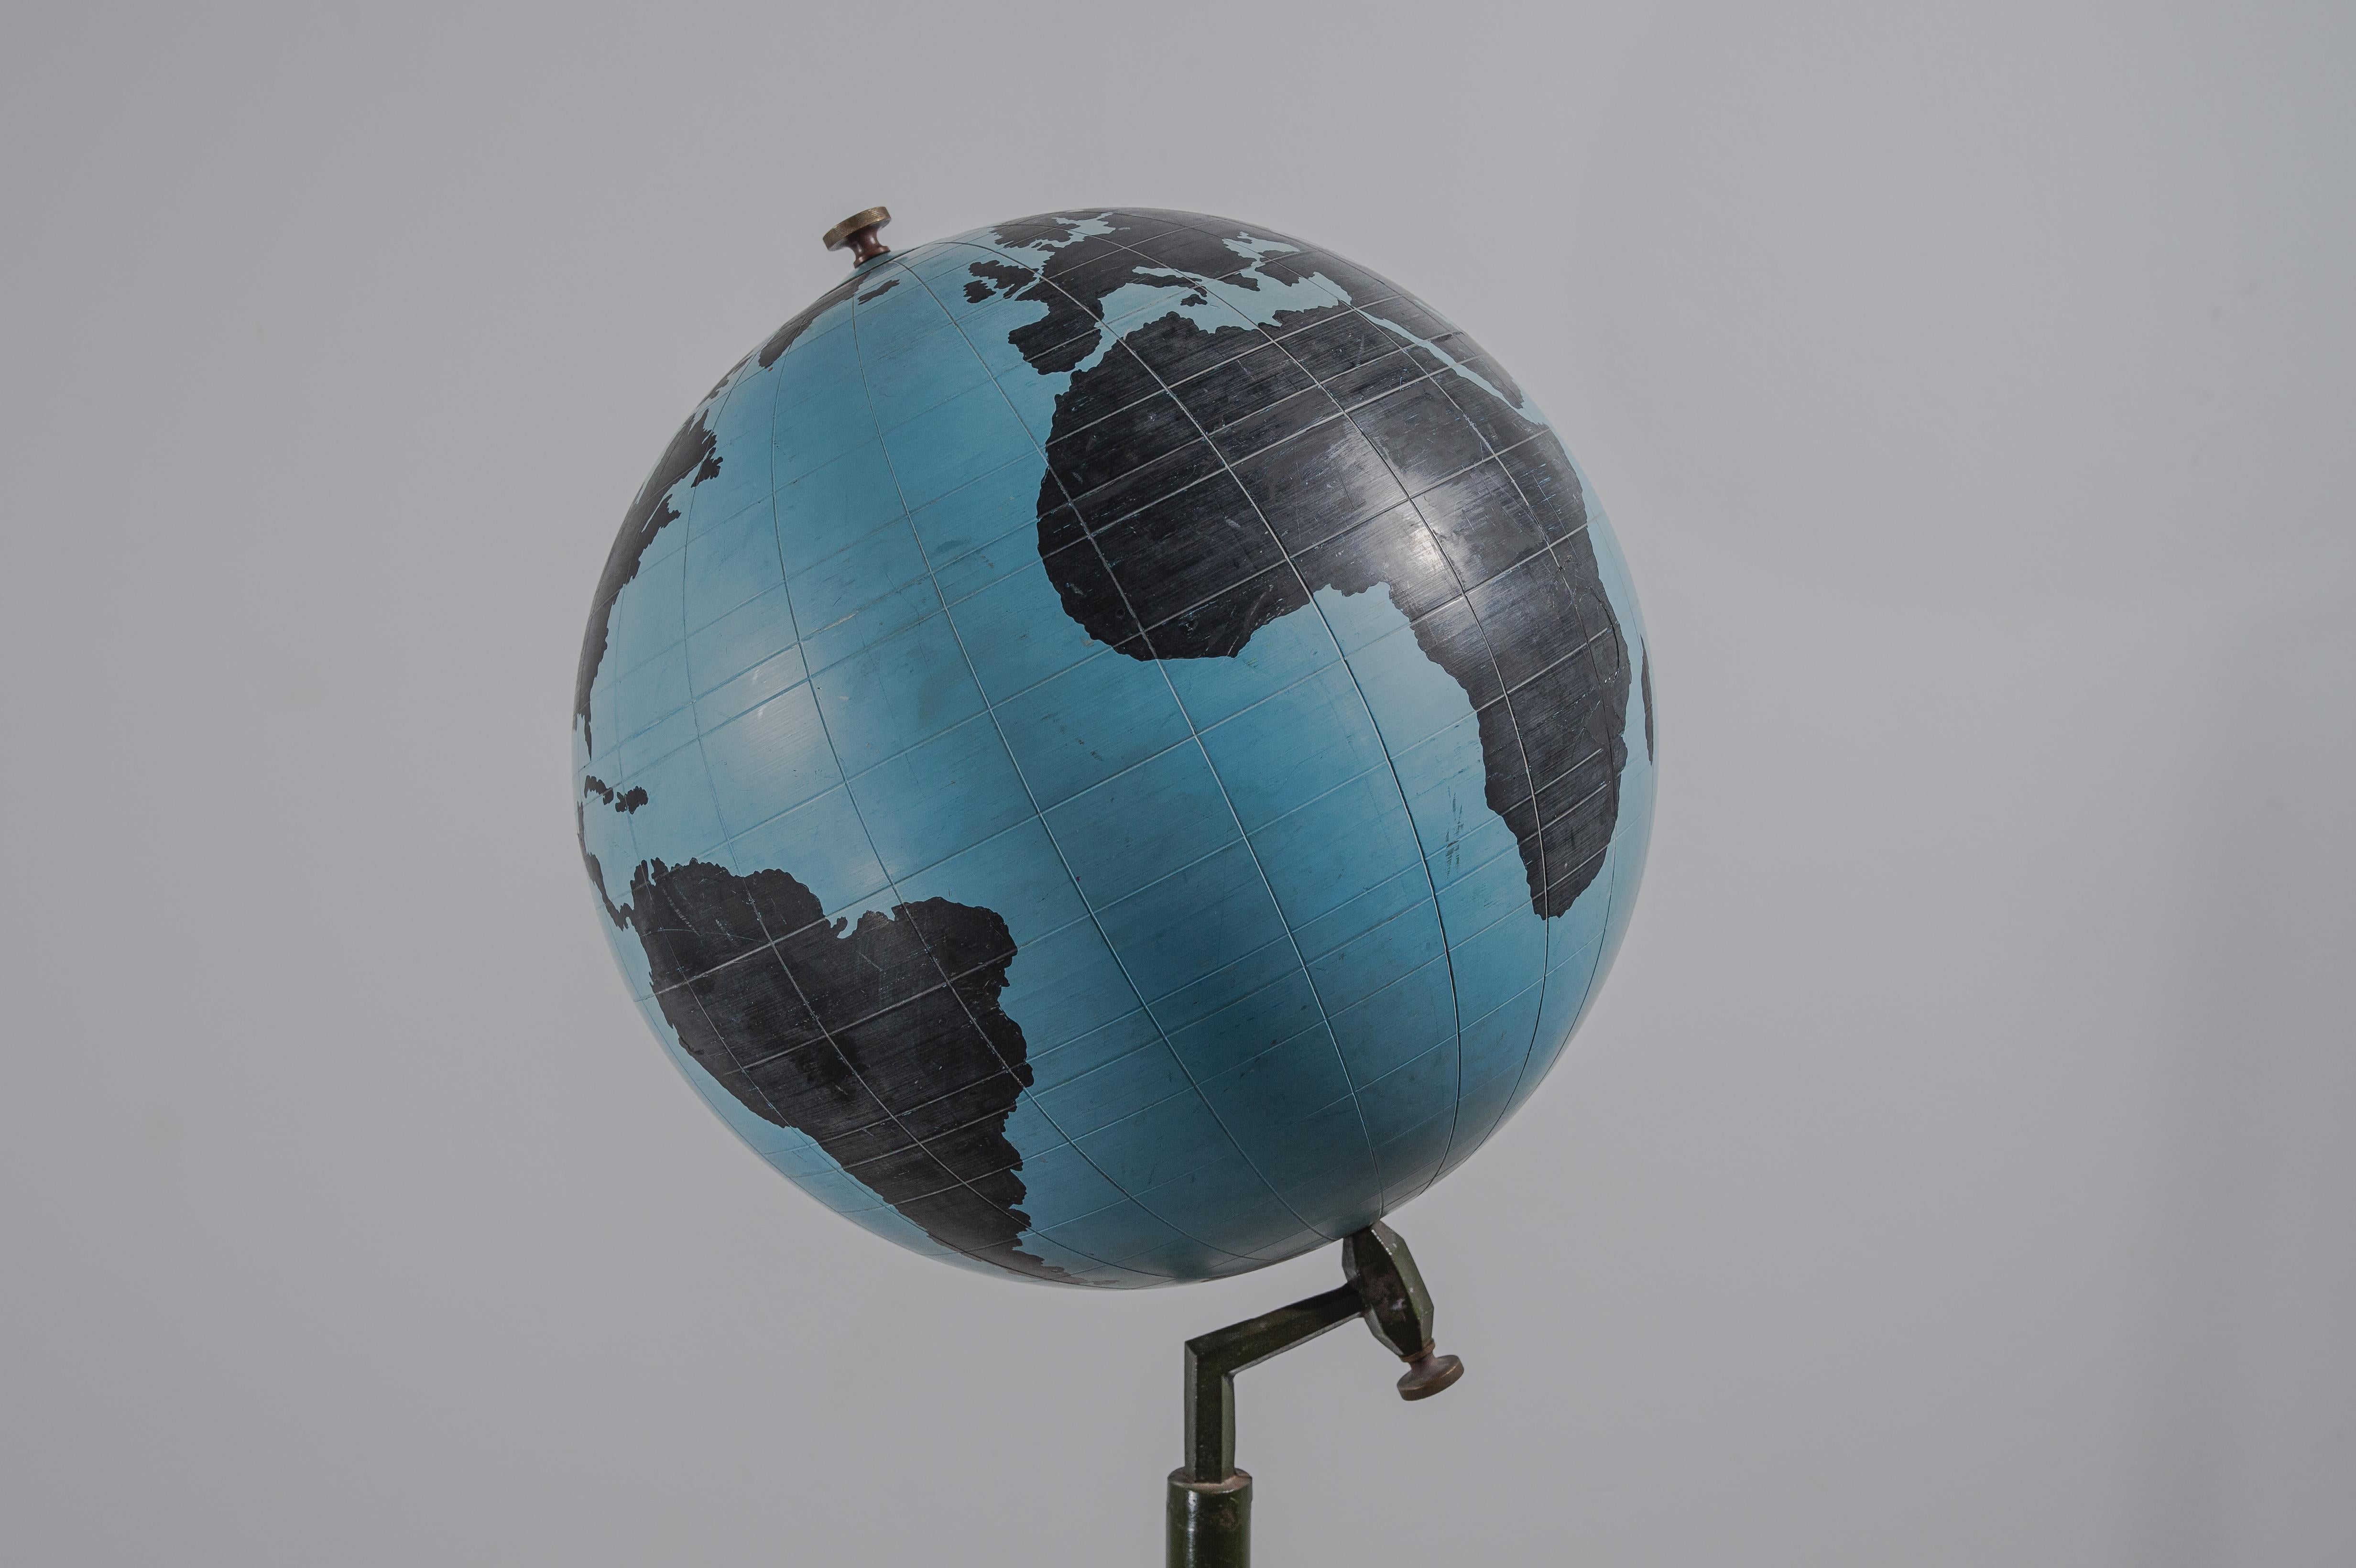 Large Globe floor stand, metal, resin, Belgium, 1950s.

Beautiful globe on a floor stand. The reserved, almost monochromatic color scheme in black and Light Blue gives the item a sculptural appearance. The strong metal stem on a round base is